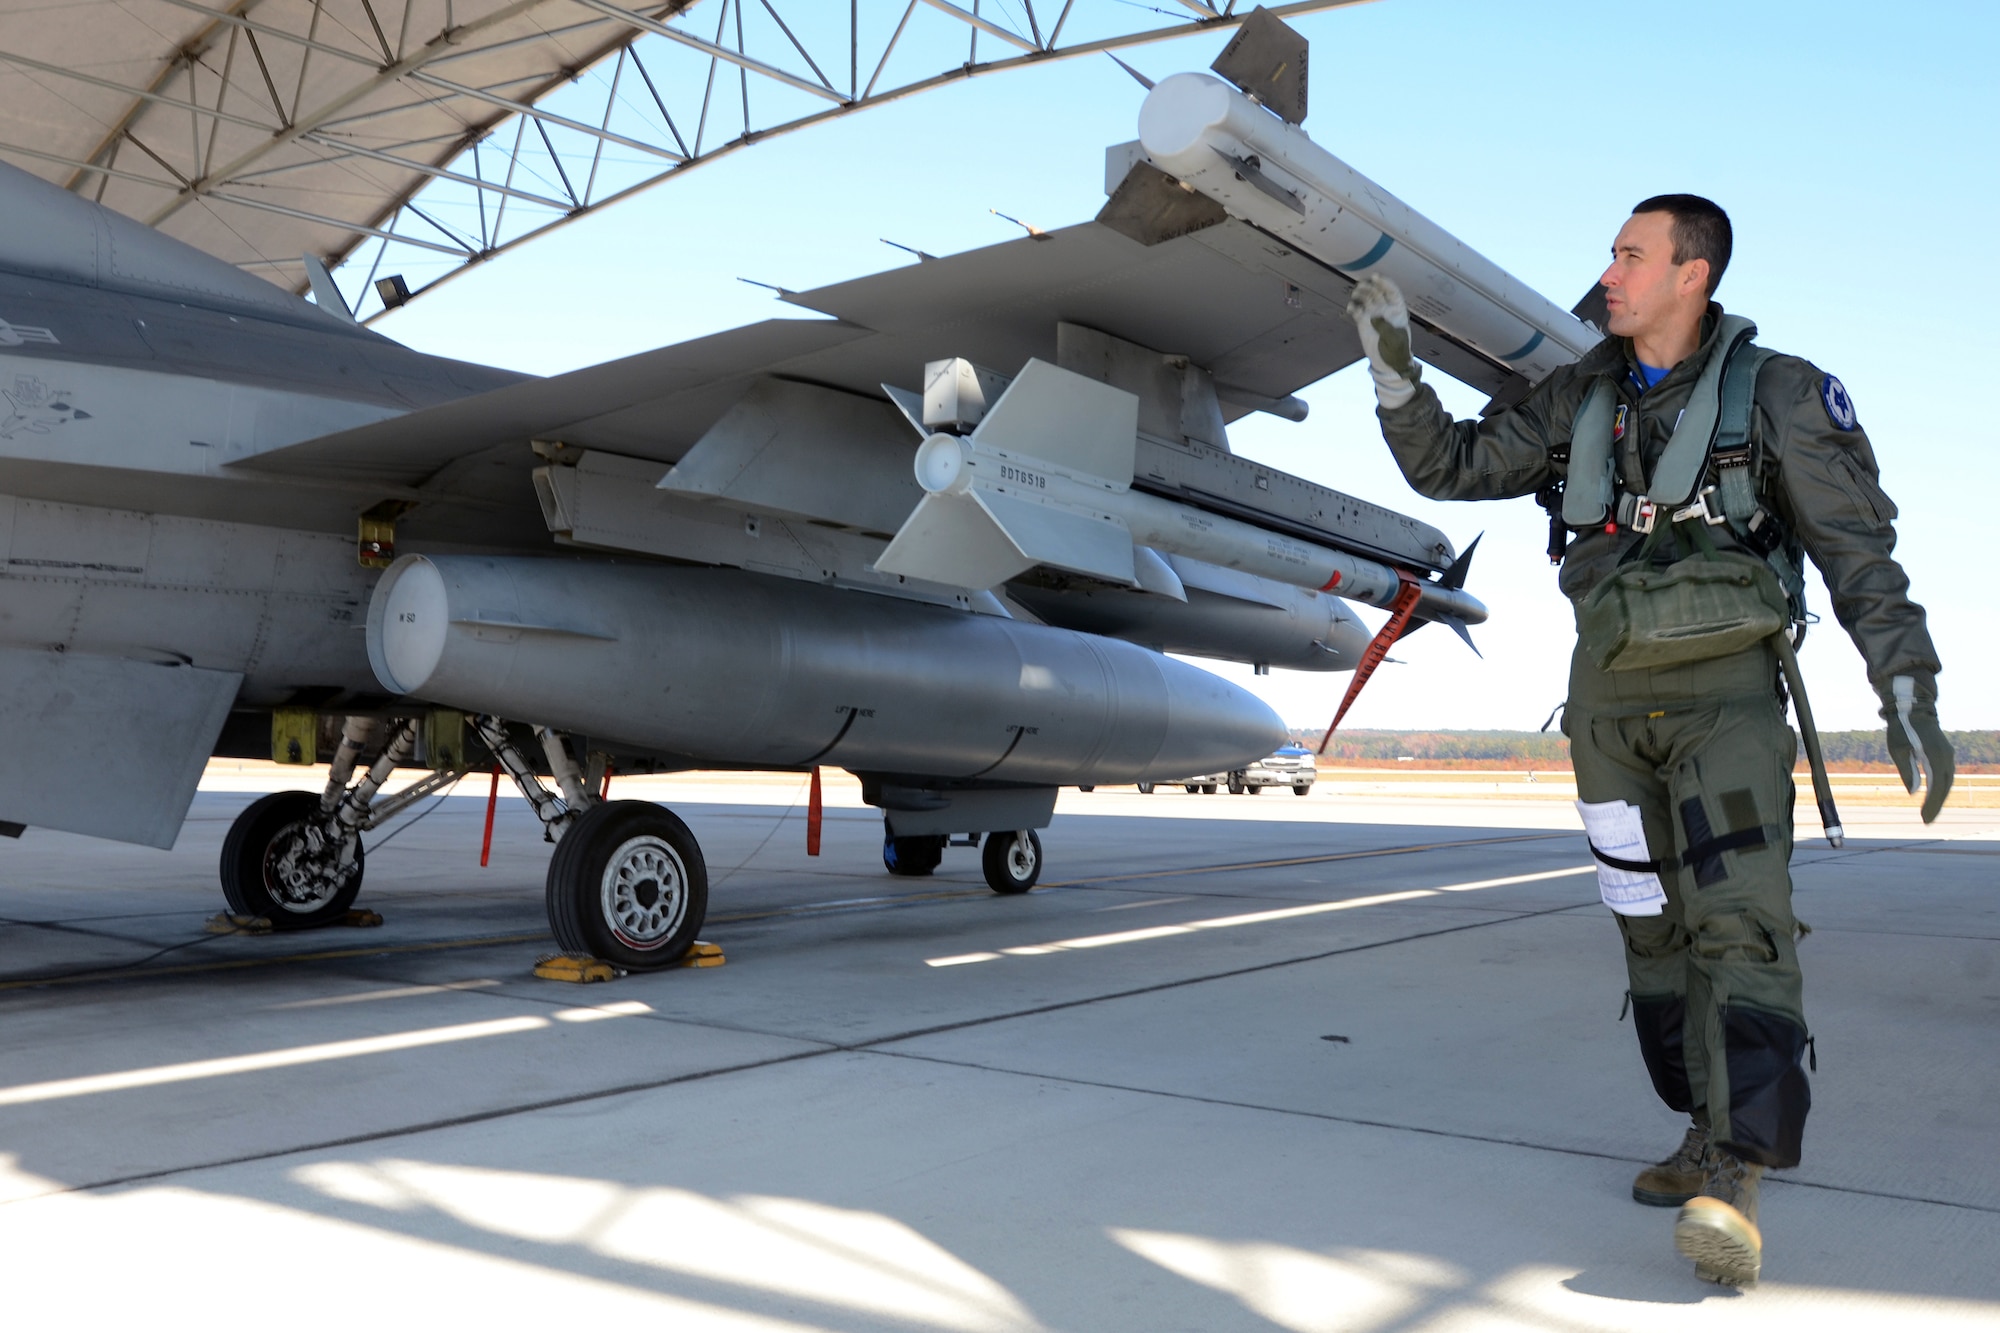 U.S. Air Force Lt. Col. Michael Ferrario, an F-16 fighter pilot with the South Carolina Air National Guard, performs a pre-flight check on the aircraft in preparation for a flight for the joint Army and Air National Guard training exercise called Carolina Thunder. South Carolina National Guard, along with North Carolina and Georgia National Guard units conducted “Carolina Thunder 14”,  a drill weekend, joint training exercise Nov. 15, 2014. More than 30 aircraft participated in the mass take-off from McEntire Joint National Guard Base, Eastover, S.C. Units conducted air and ground operations at the Savannah River Site in Allendale, S.C. The S.C. Air National Guard 169th Fighter Wing’s F-16 Fighting Falcons joined AH-64D Apaches, CH-47 Chinooks, UH-60 Black Hawks and more than 100 Infantry Soldiers from the S.C. Army National Guard to train with Apaches from the N.C. Army National Guard and the Joint Surveillance Target Attack Radar System (JSATRS) and Joint Terminal Training Center (JTAC) from the Georgia Air National Guard in a collective force-on-force, enemy suppression and assault mission. (U.S. Air National Guard photo by Amn Megan Floyd/Released)